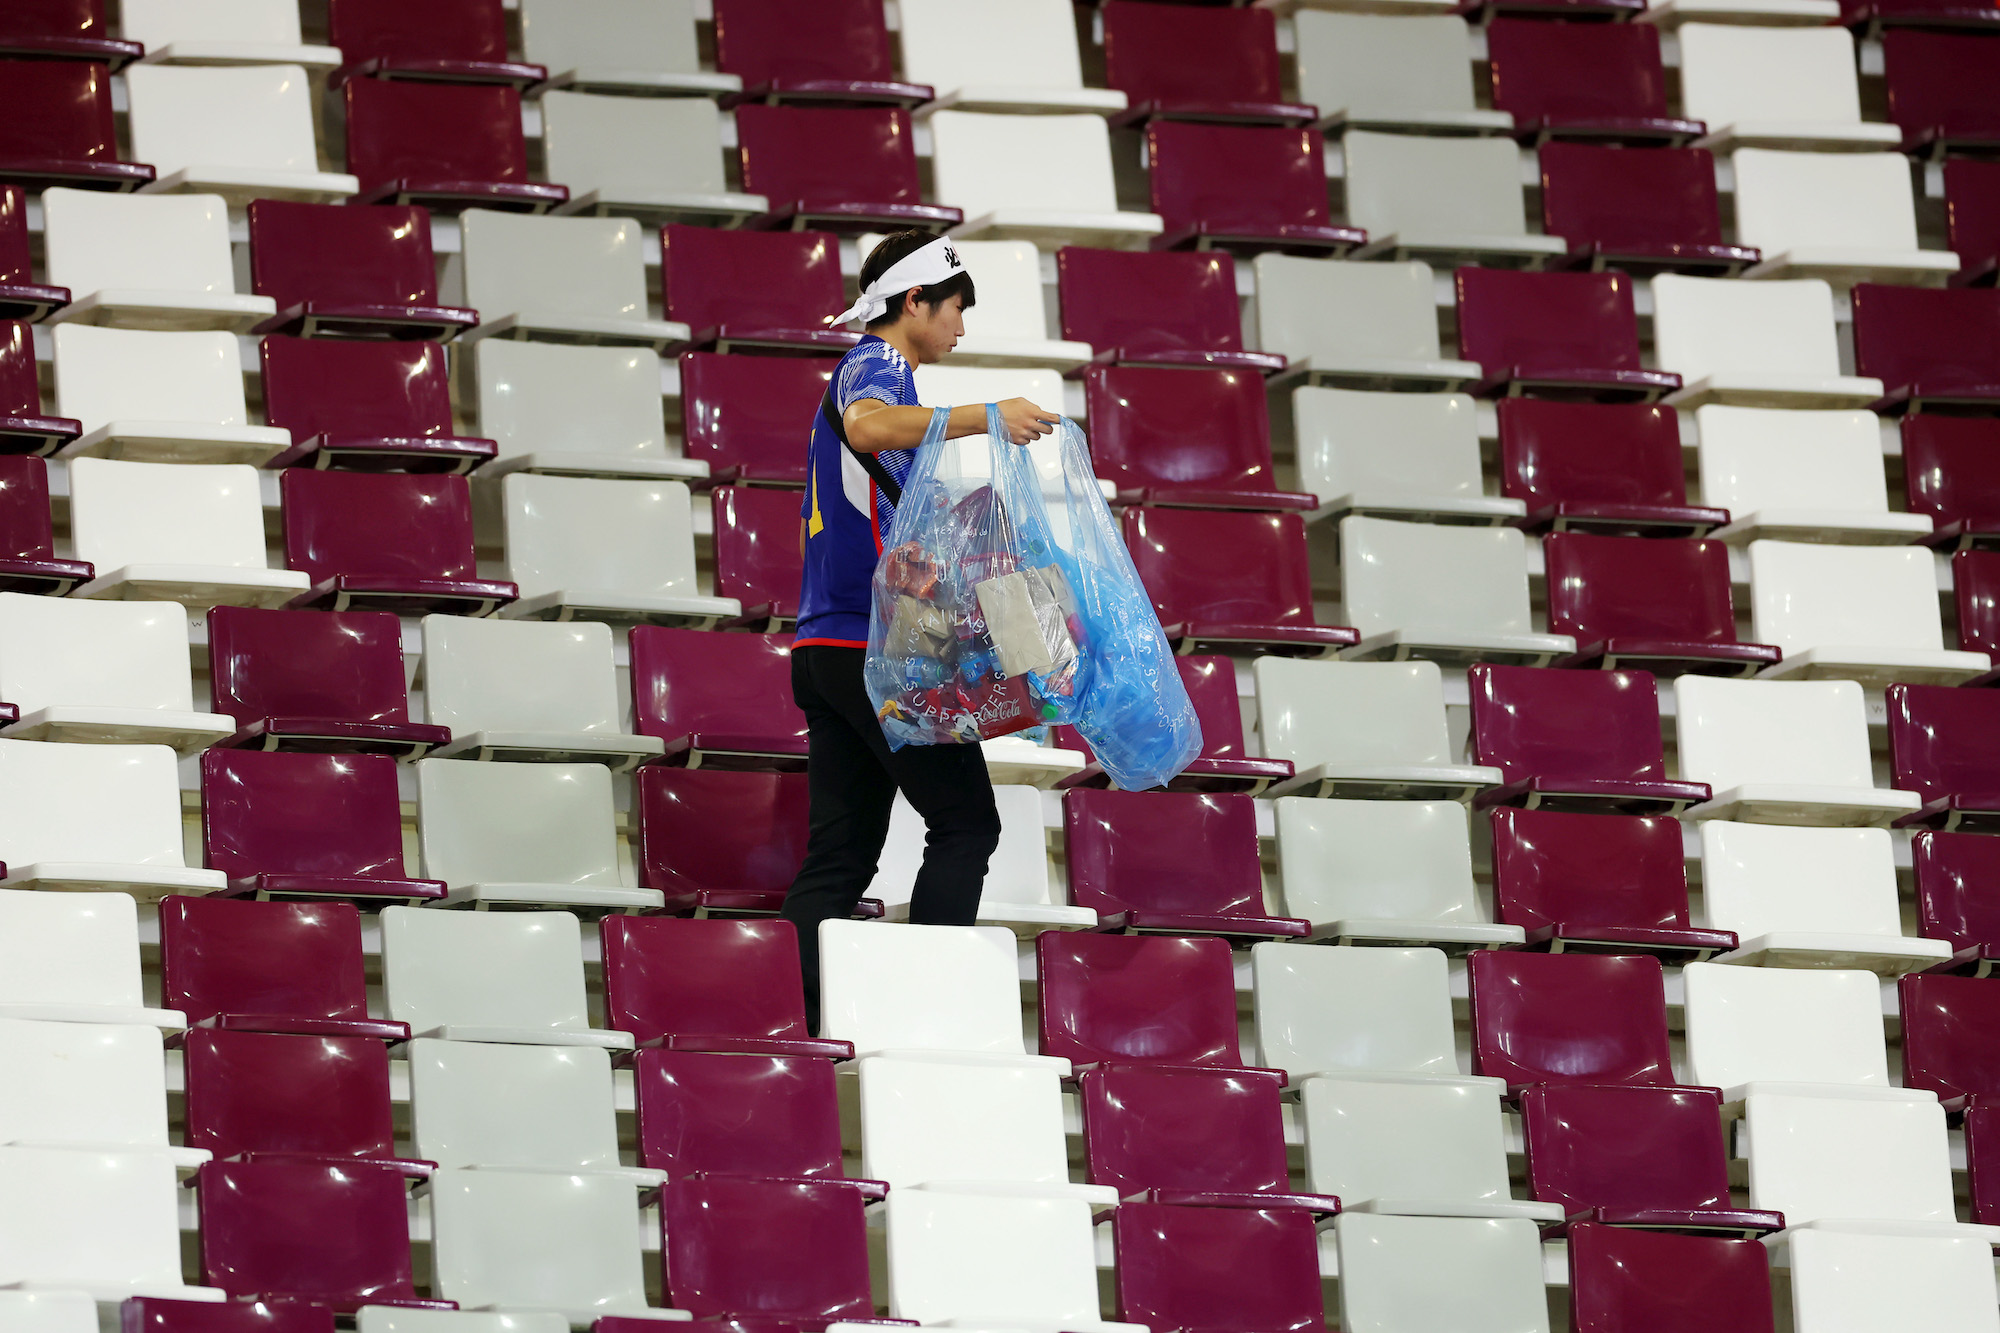 A Japanese fan clears rubbish from the stands during after a match against Germany at Khalifa International Stadium on Wednesday.